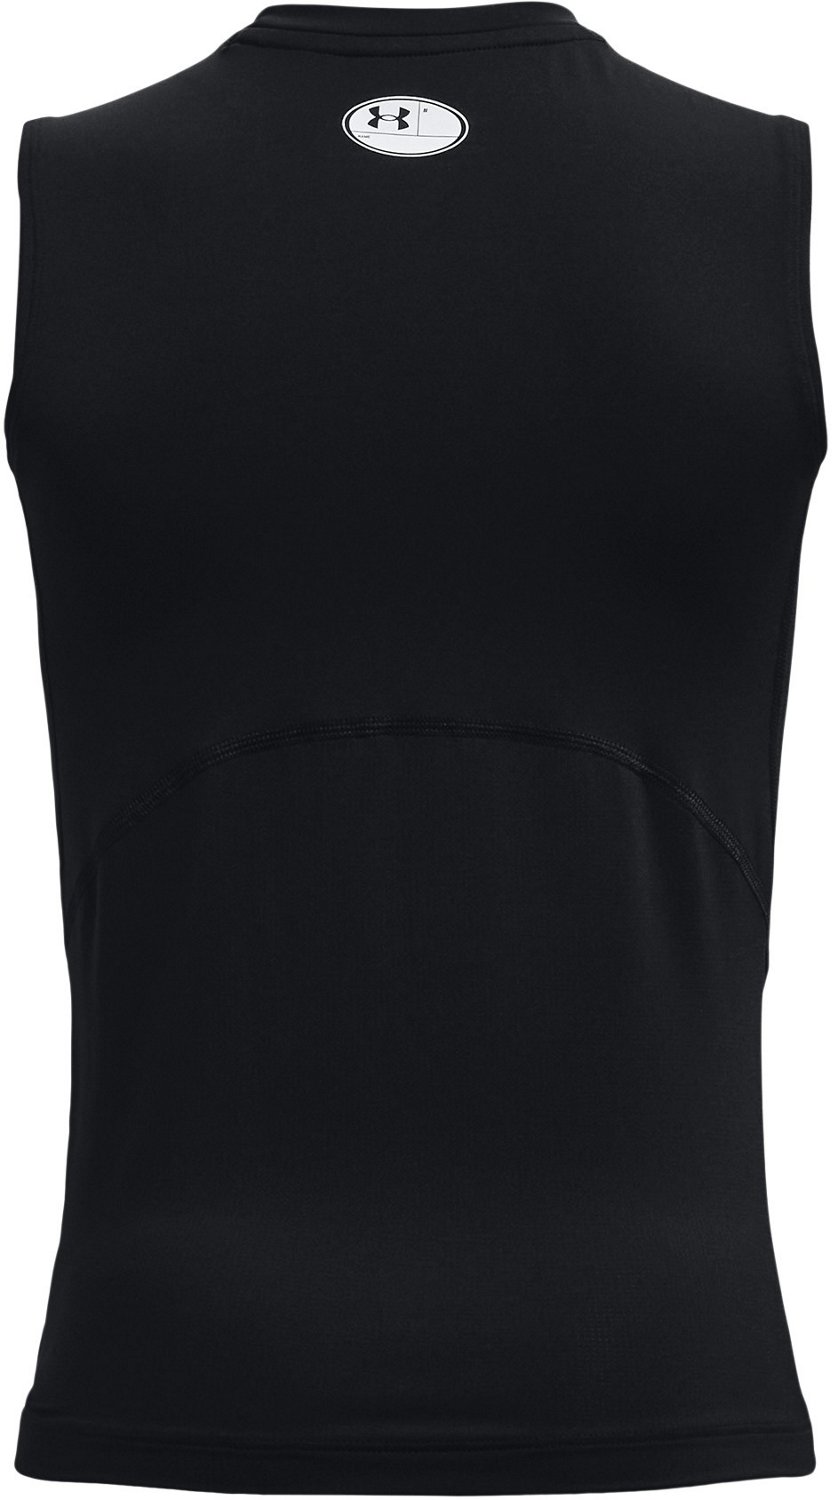 Under Armour Men's Heatgear Armour Sleeveless - Men tanktop for any sports  and outdoor activities